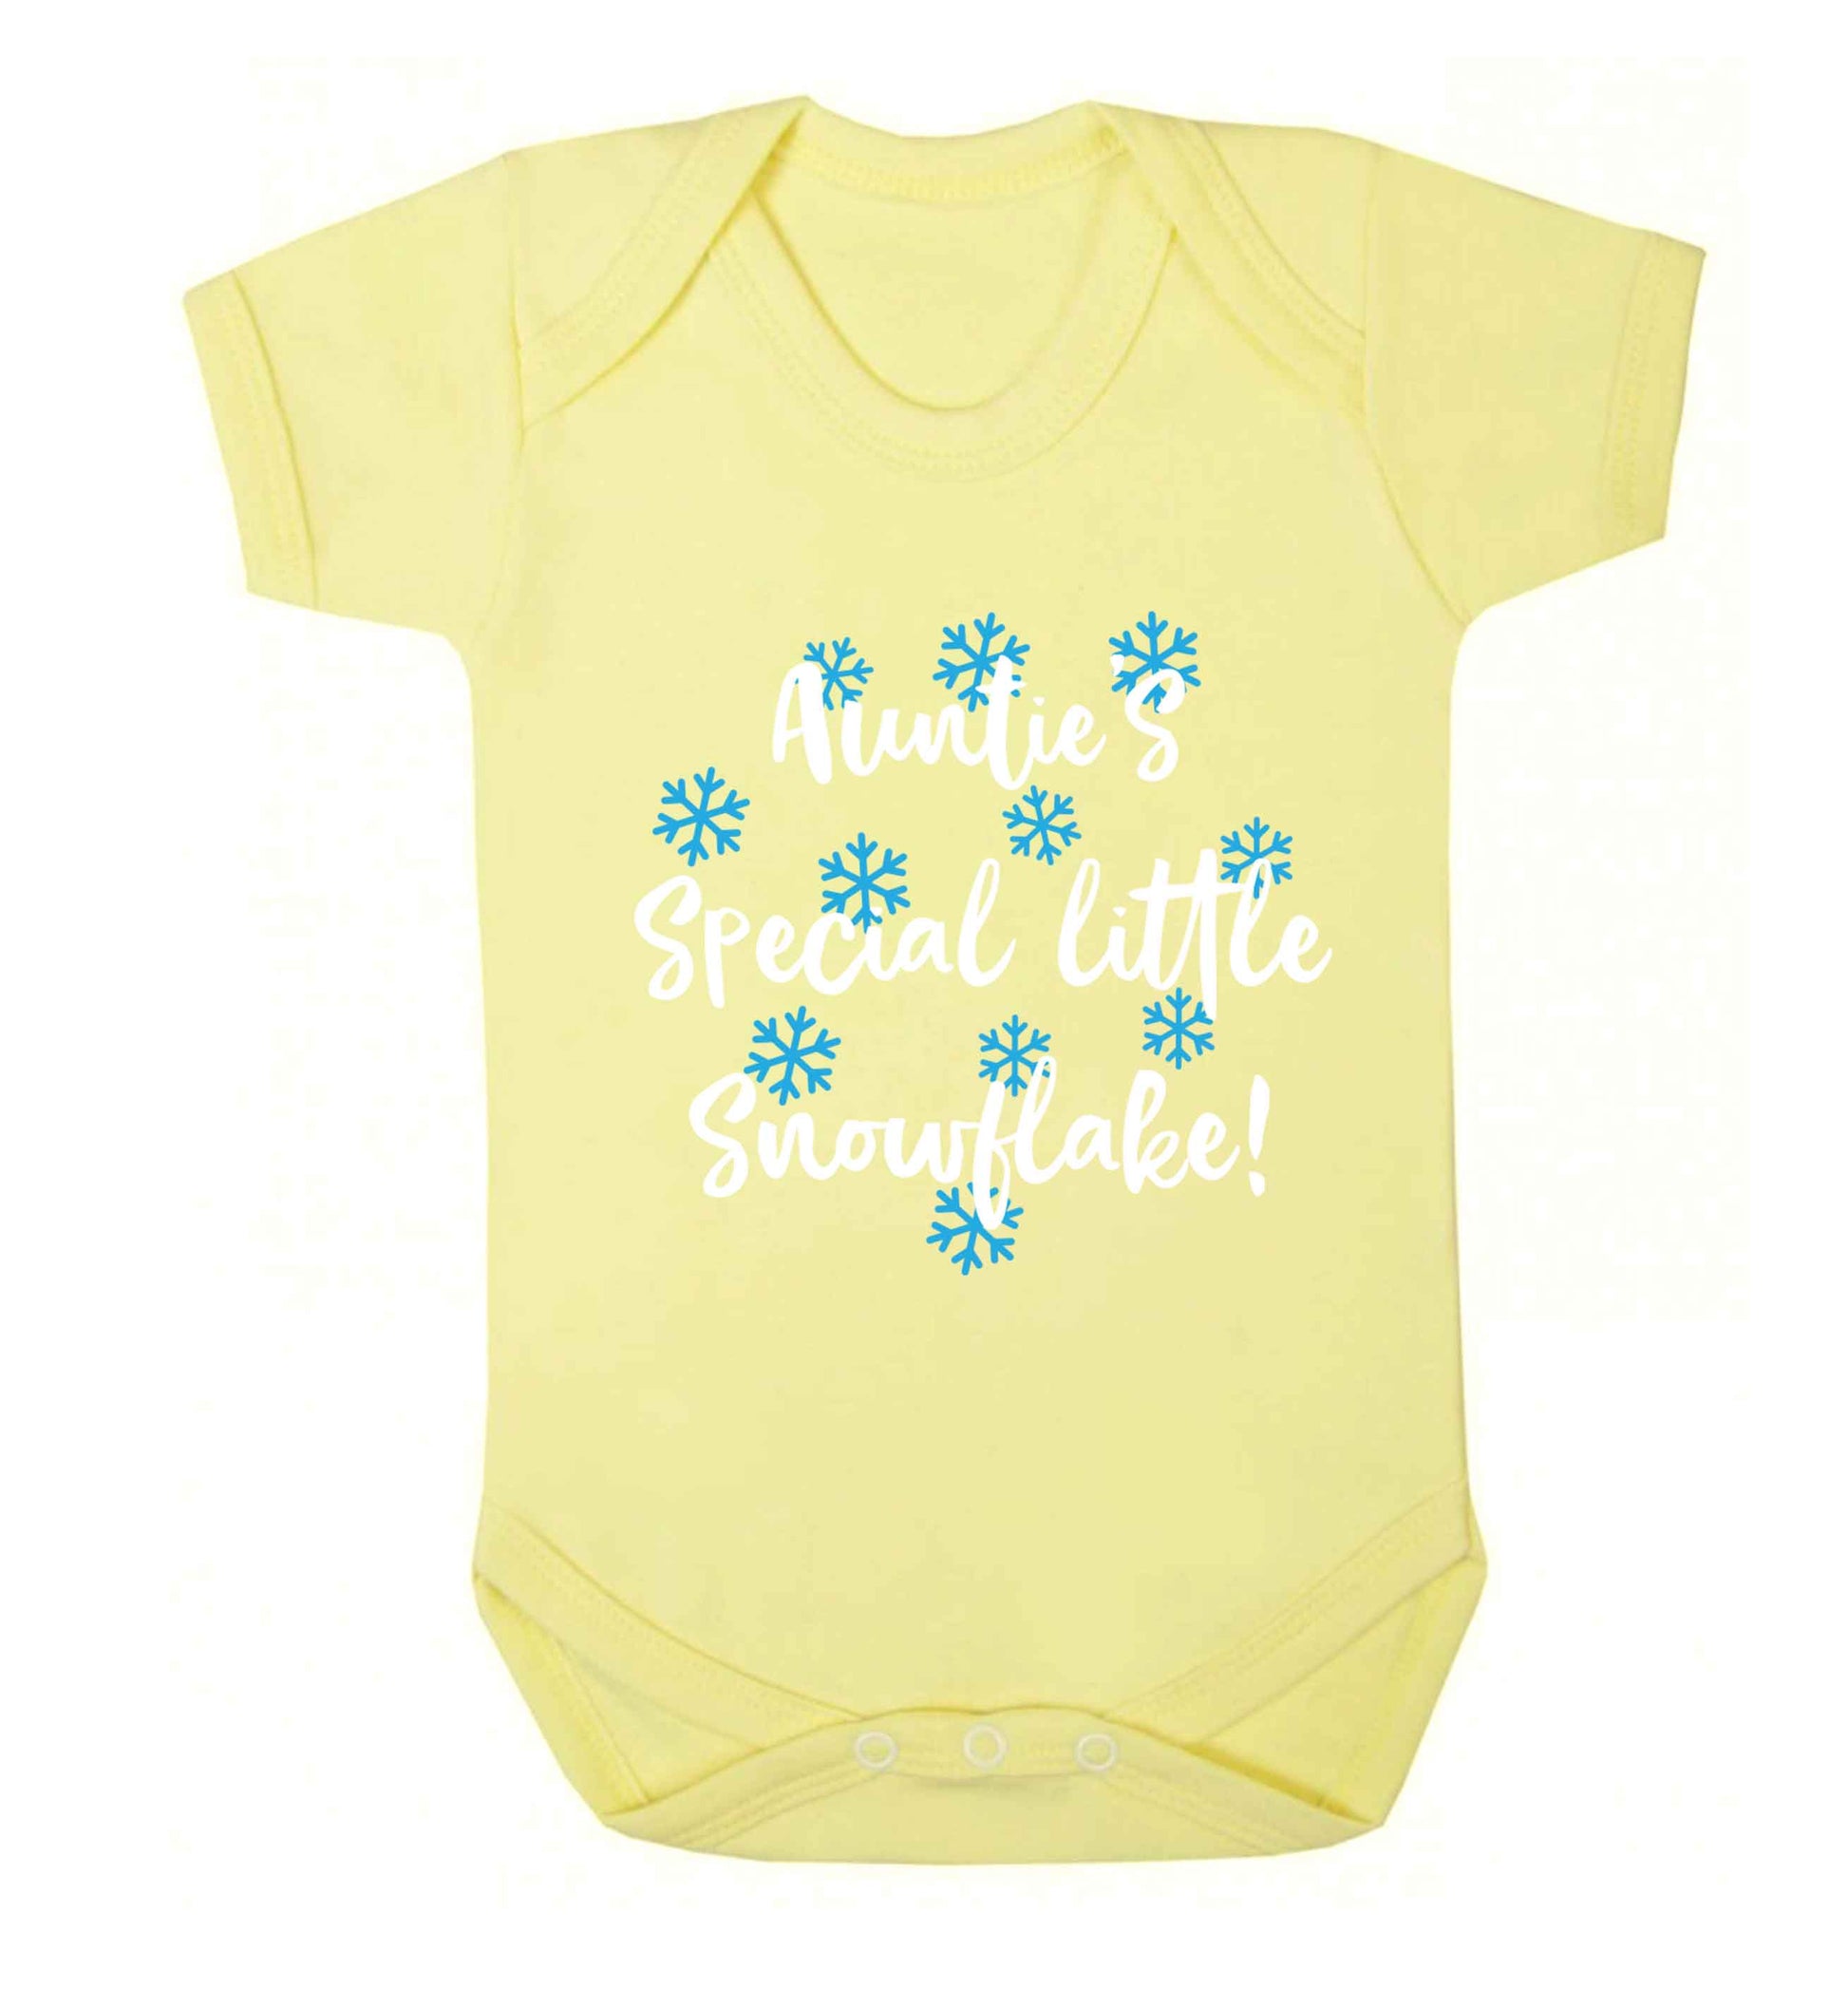 Auntie's special little snowflake Baby Vest pale yellow 18-24 months